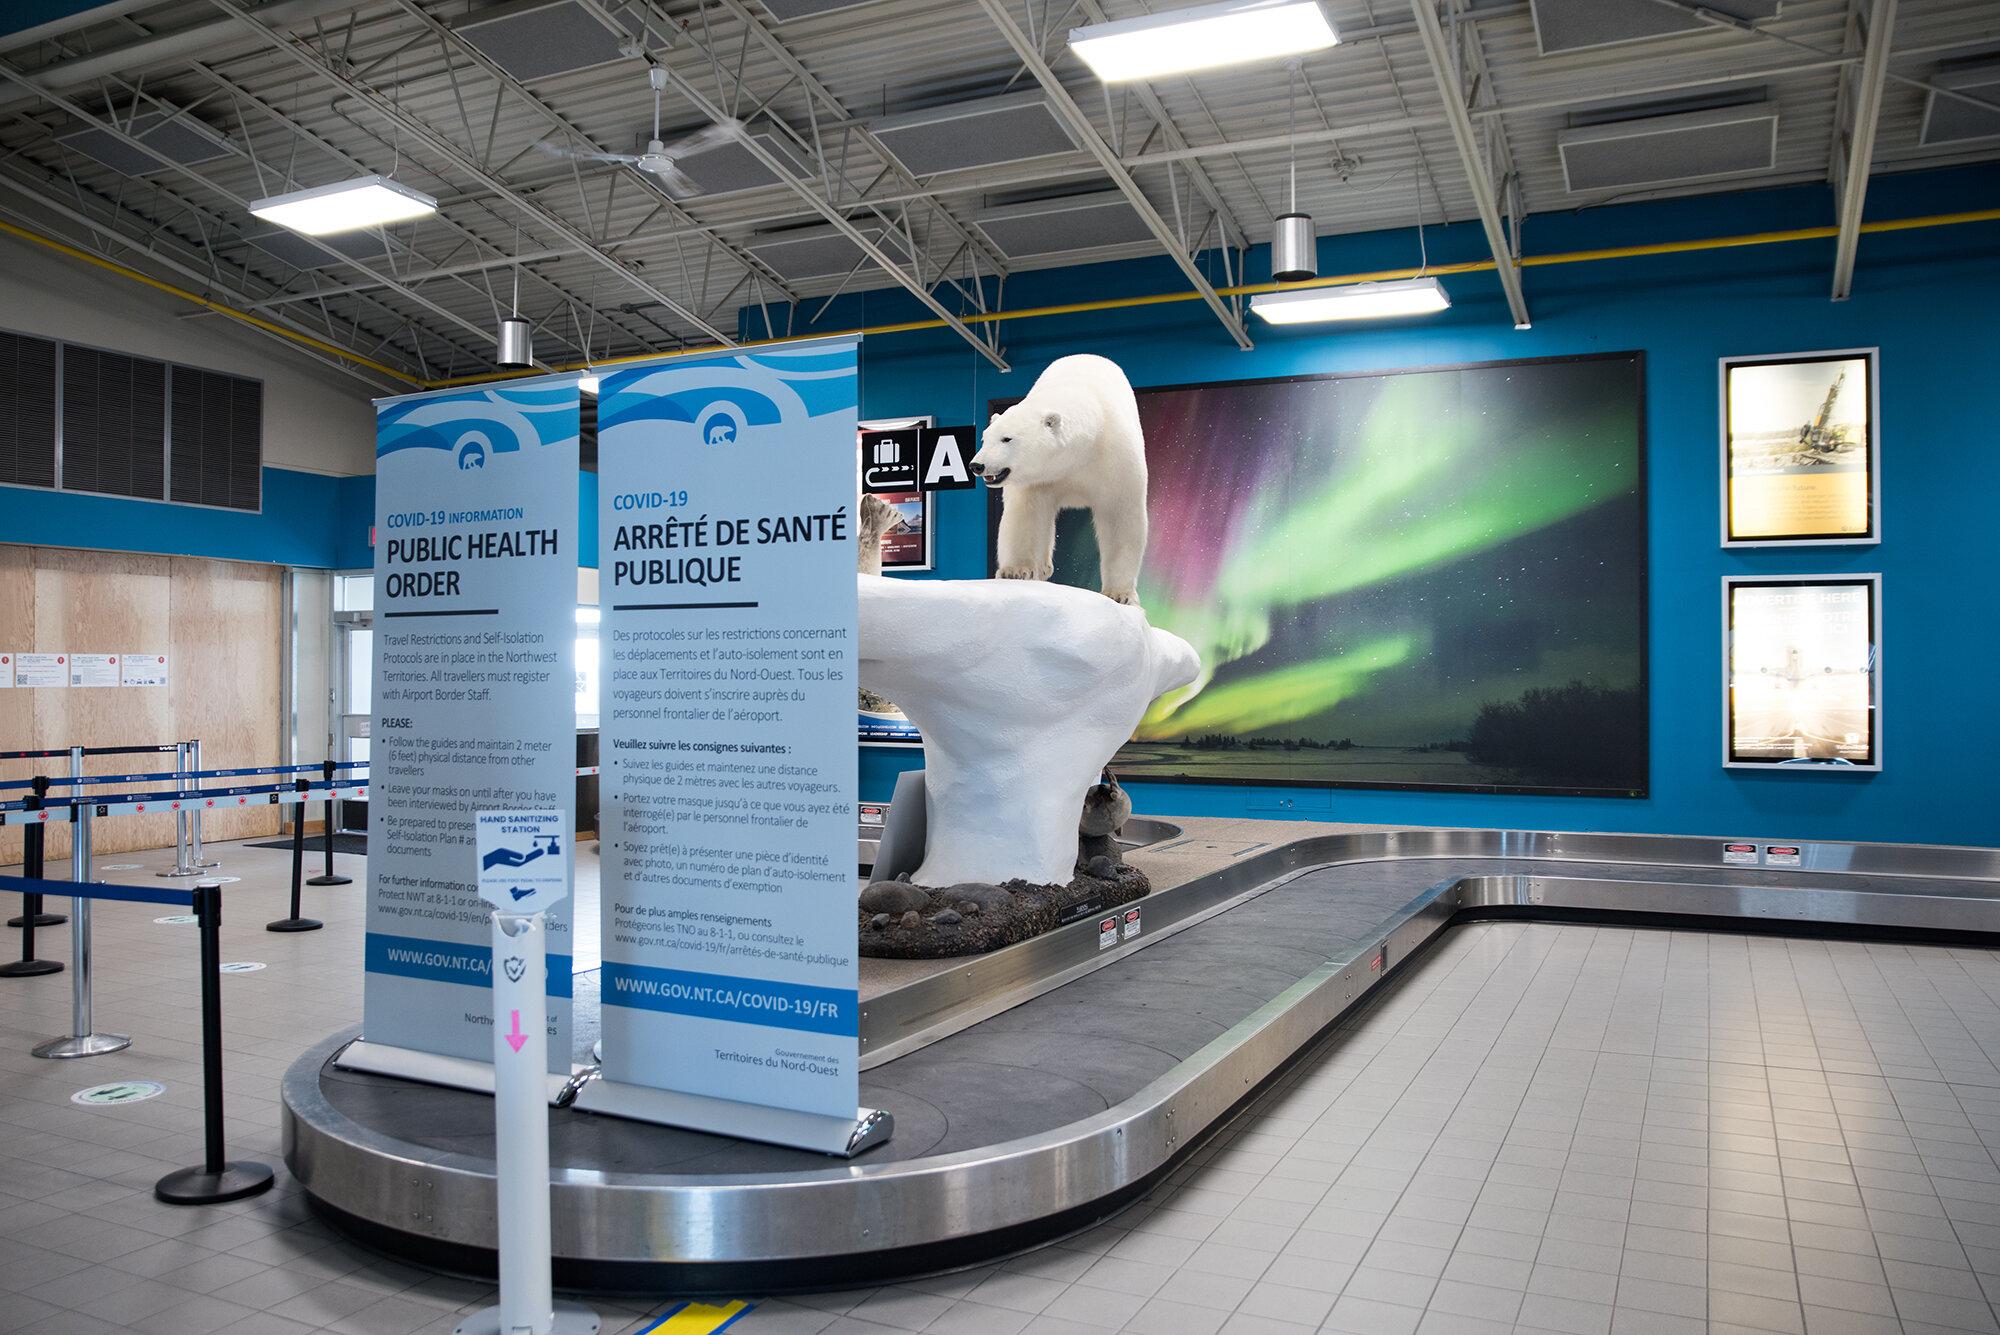 Pandemic Plan - The New York Times - The arrivals area of the Yellowknife airport is covered...